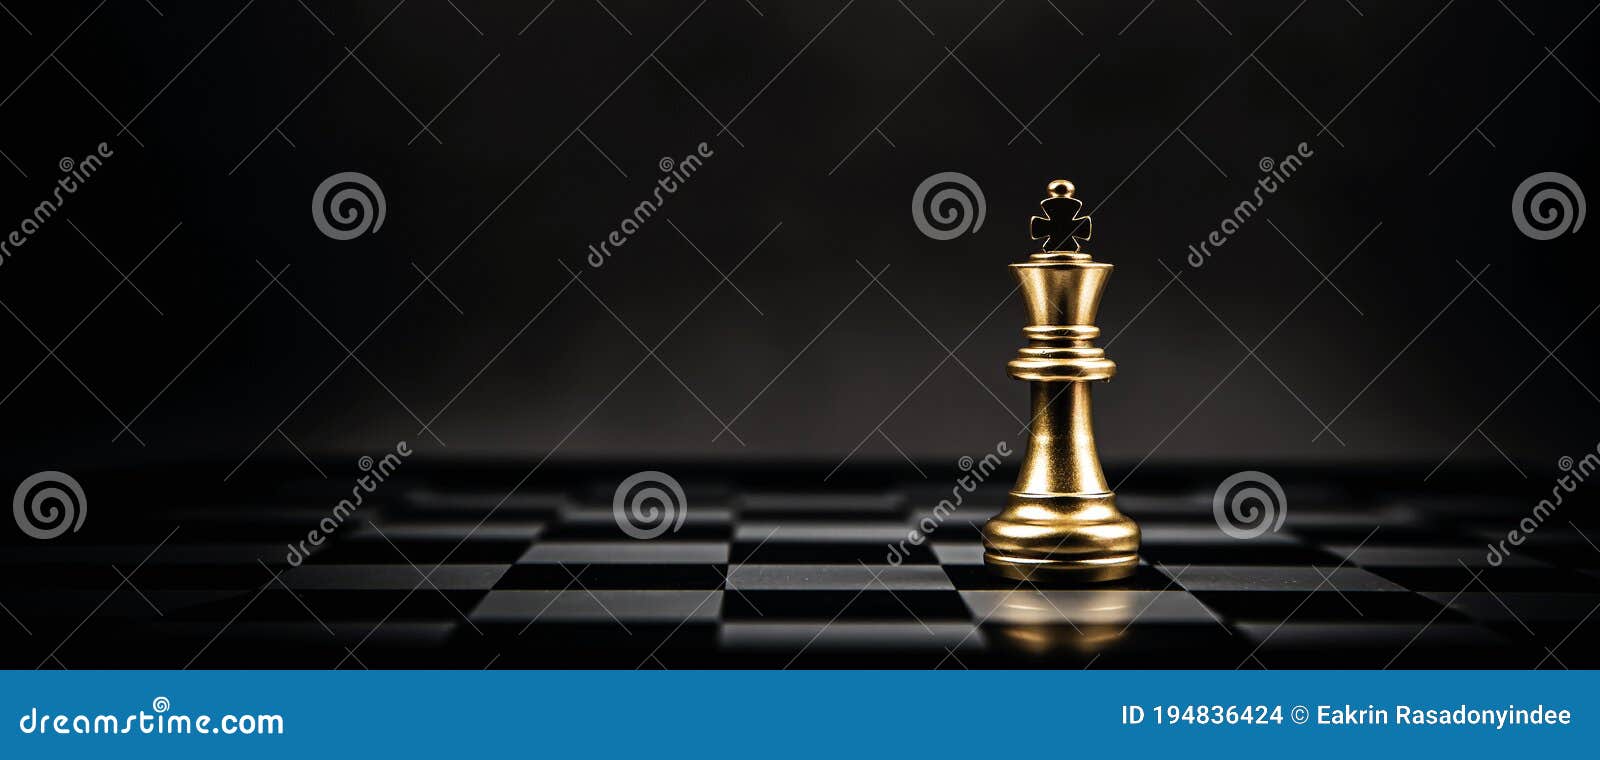 king golden chess standing on chess board concept of business strategic plan